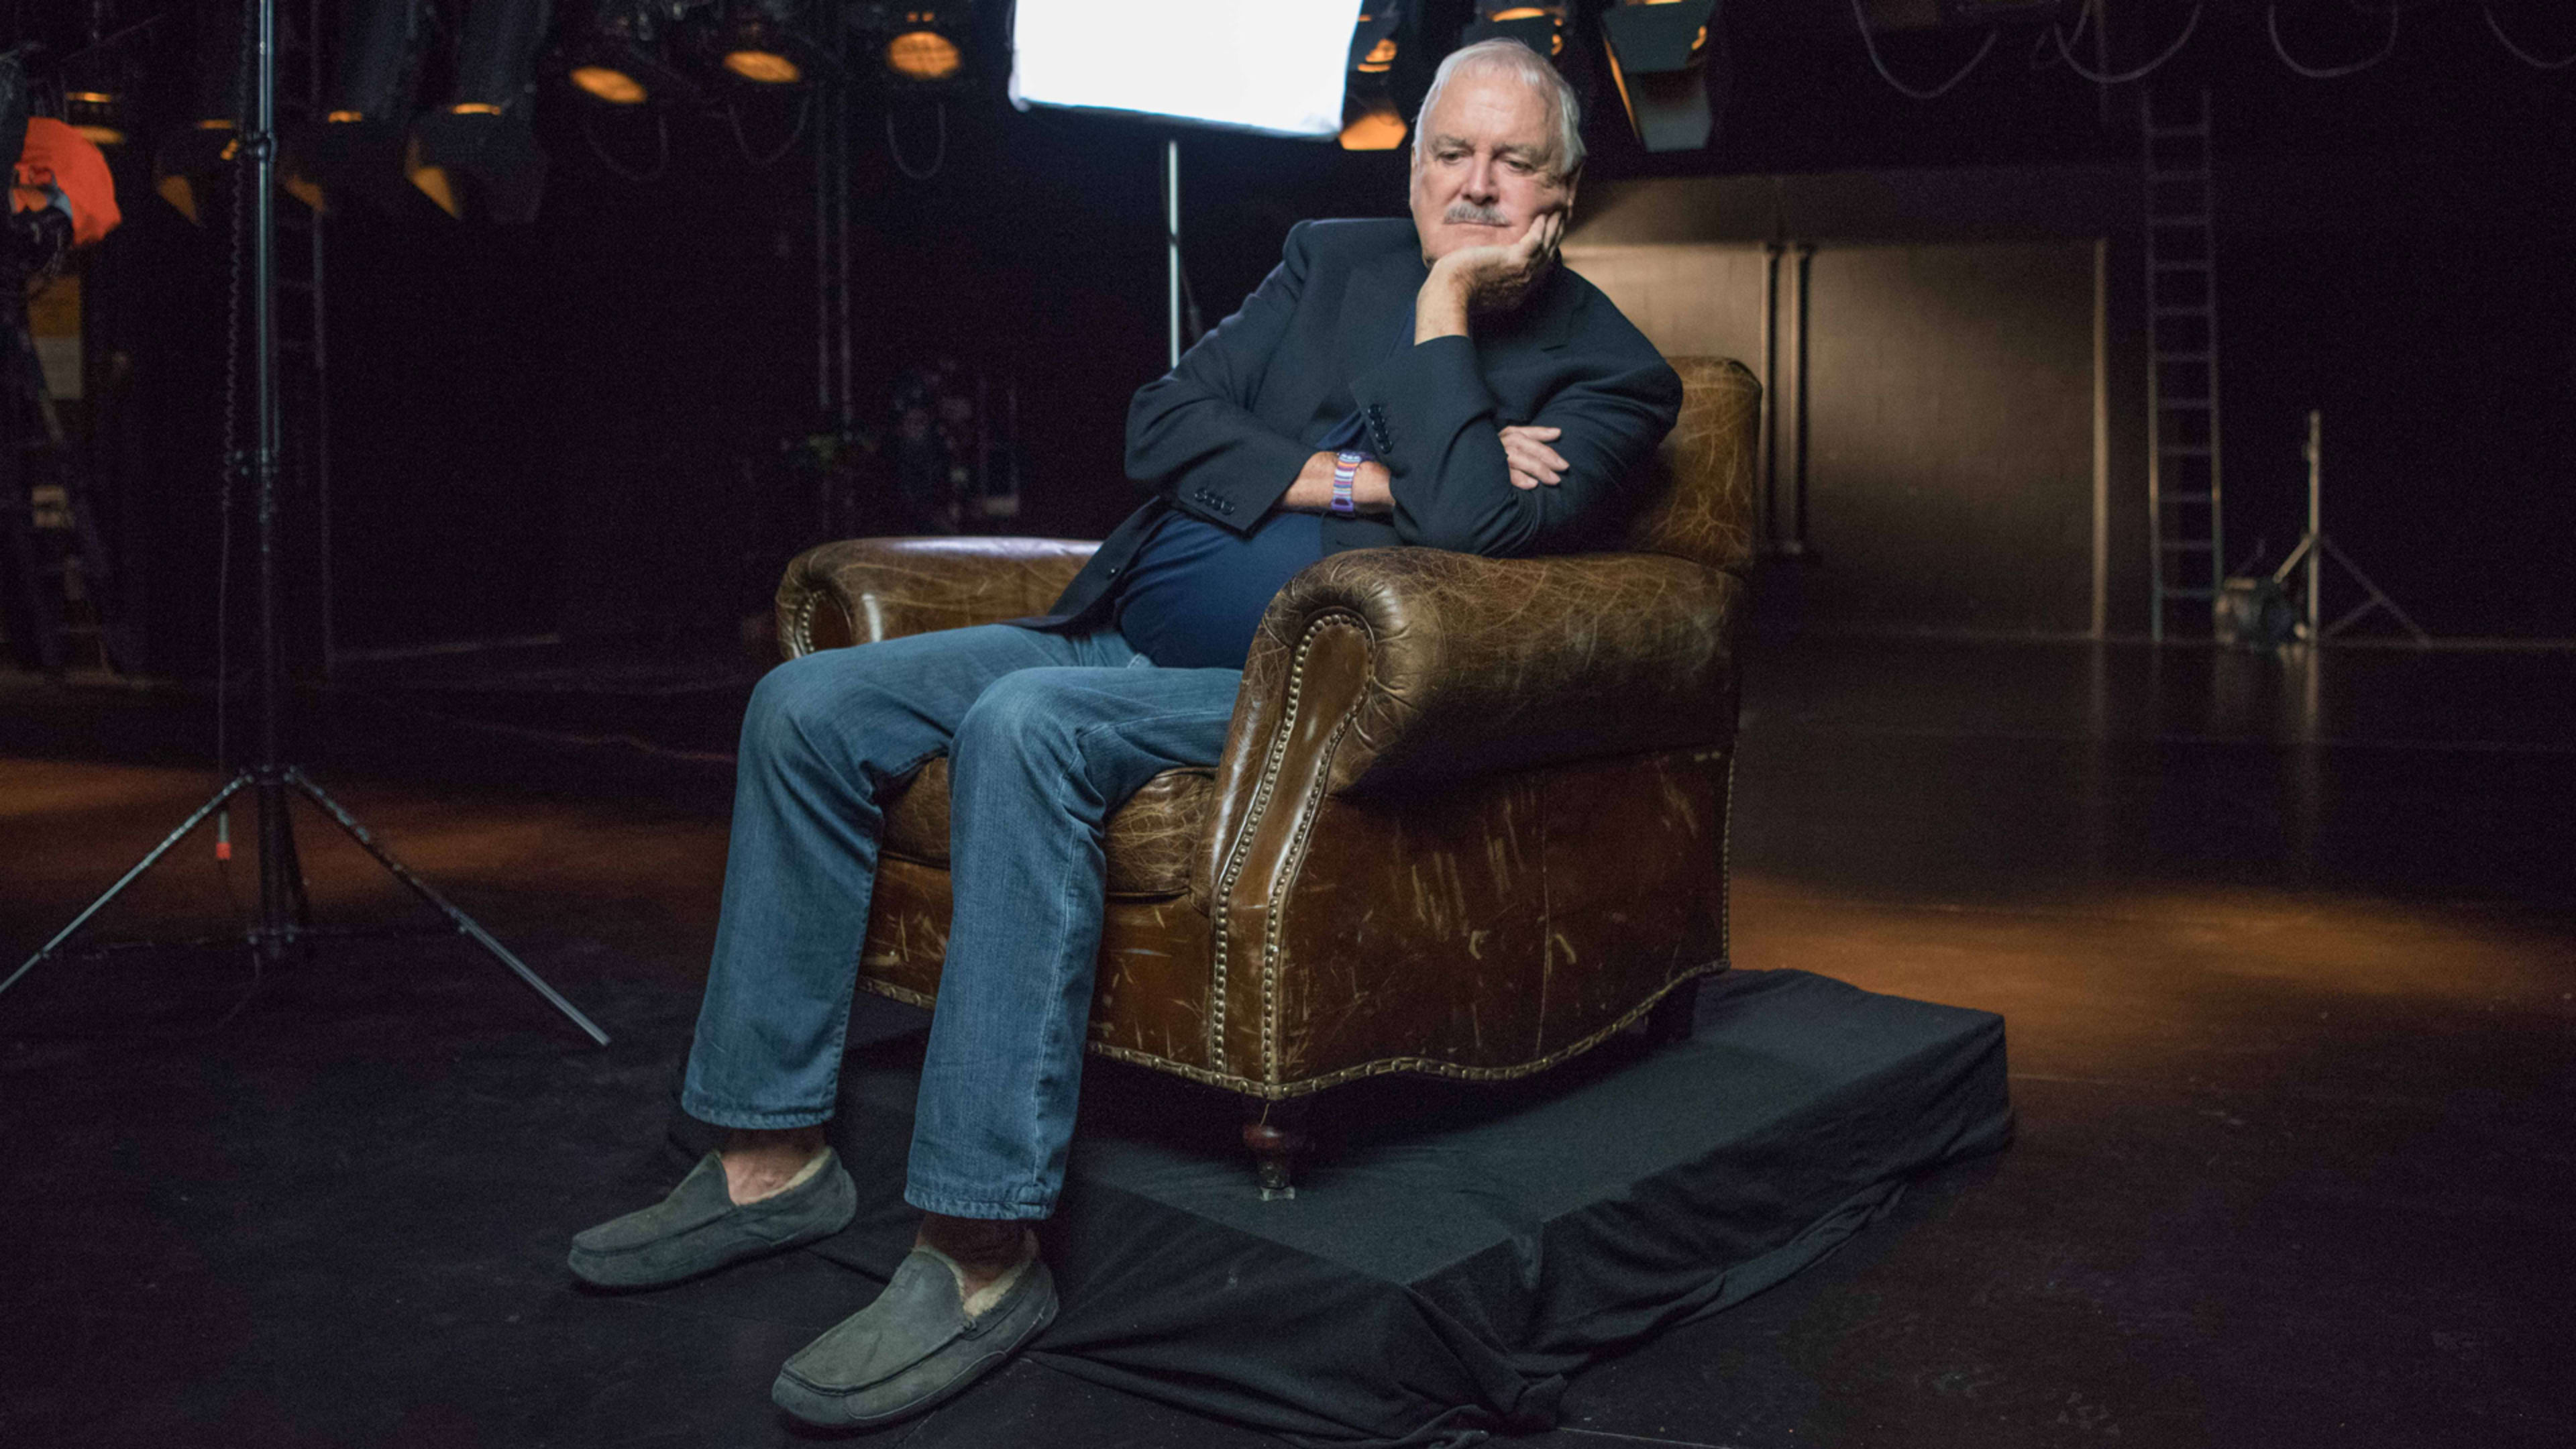 John Cleese has some good recommendations for how to deal with a**holes